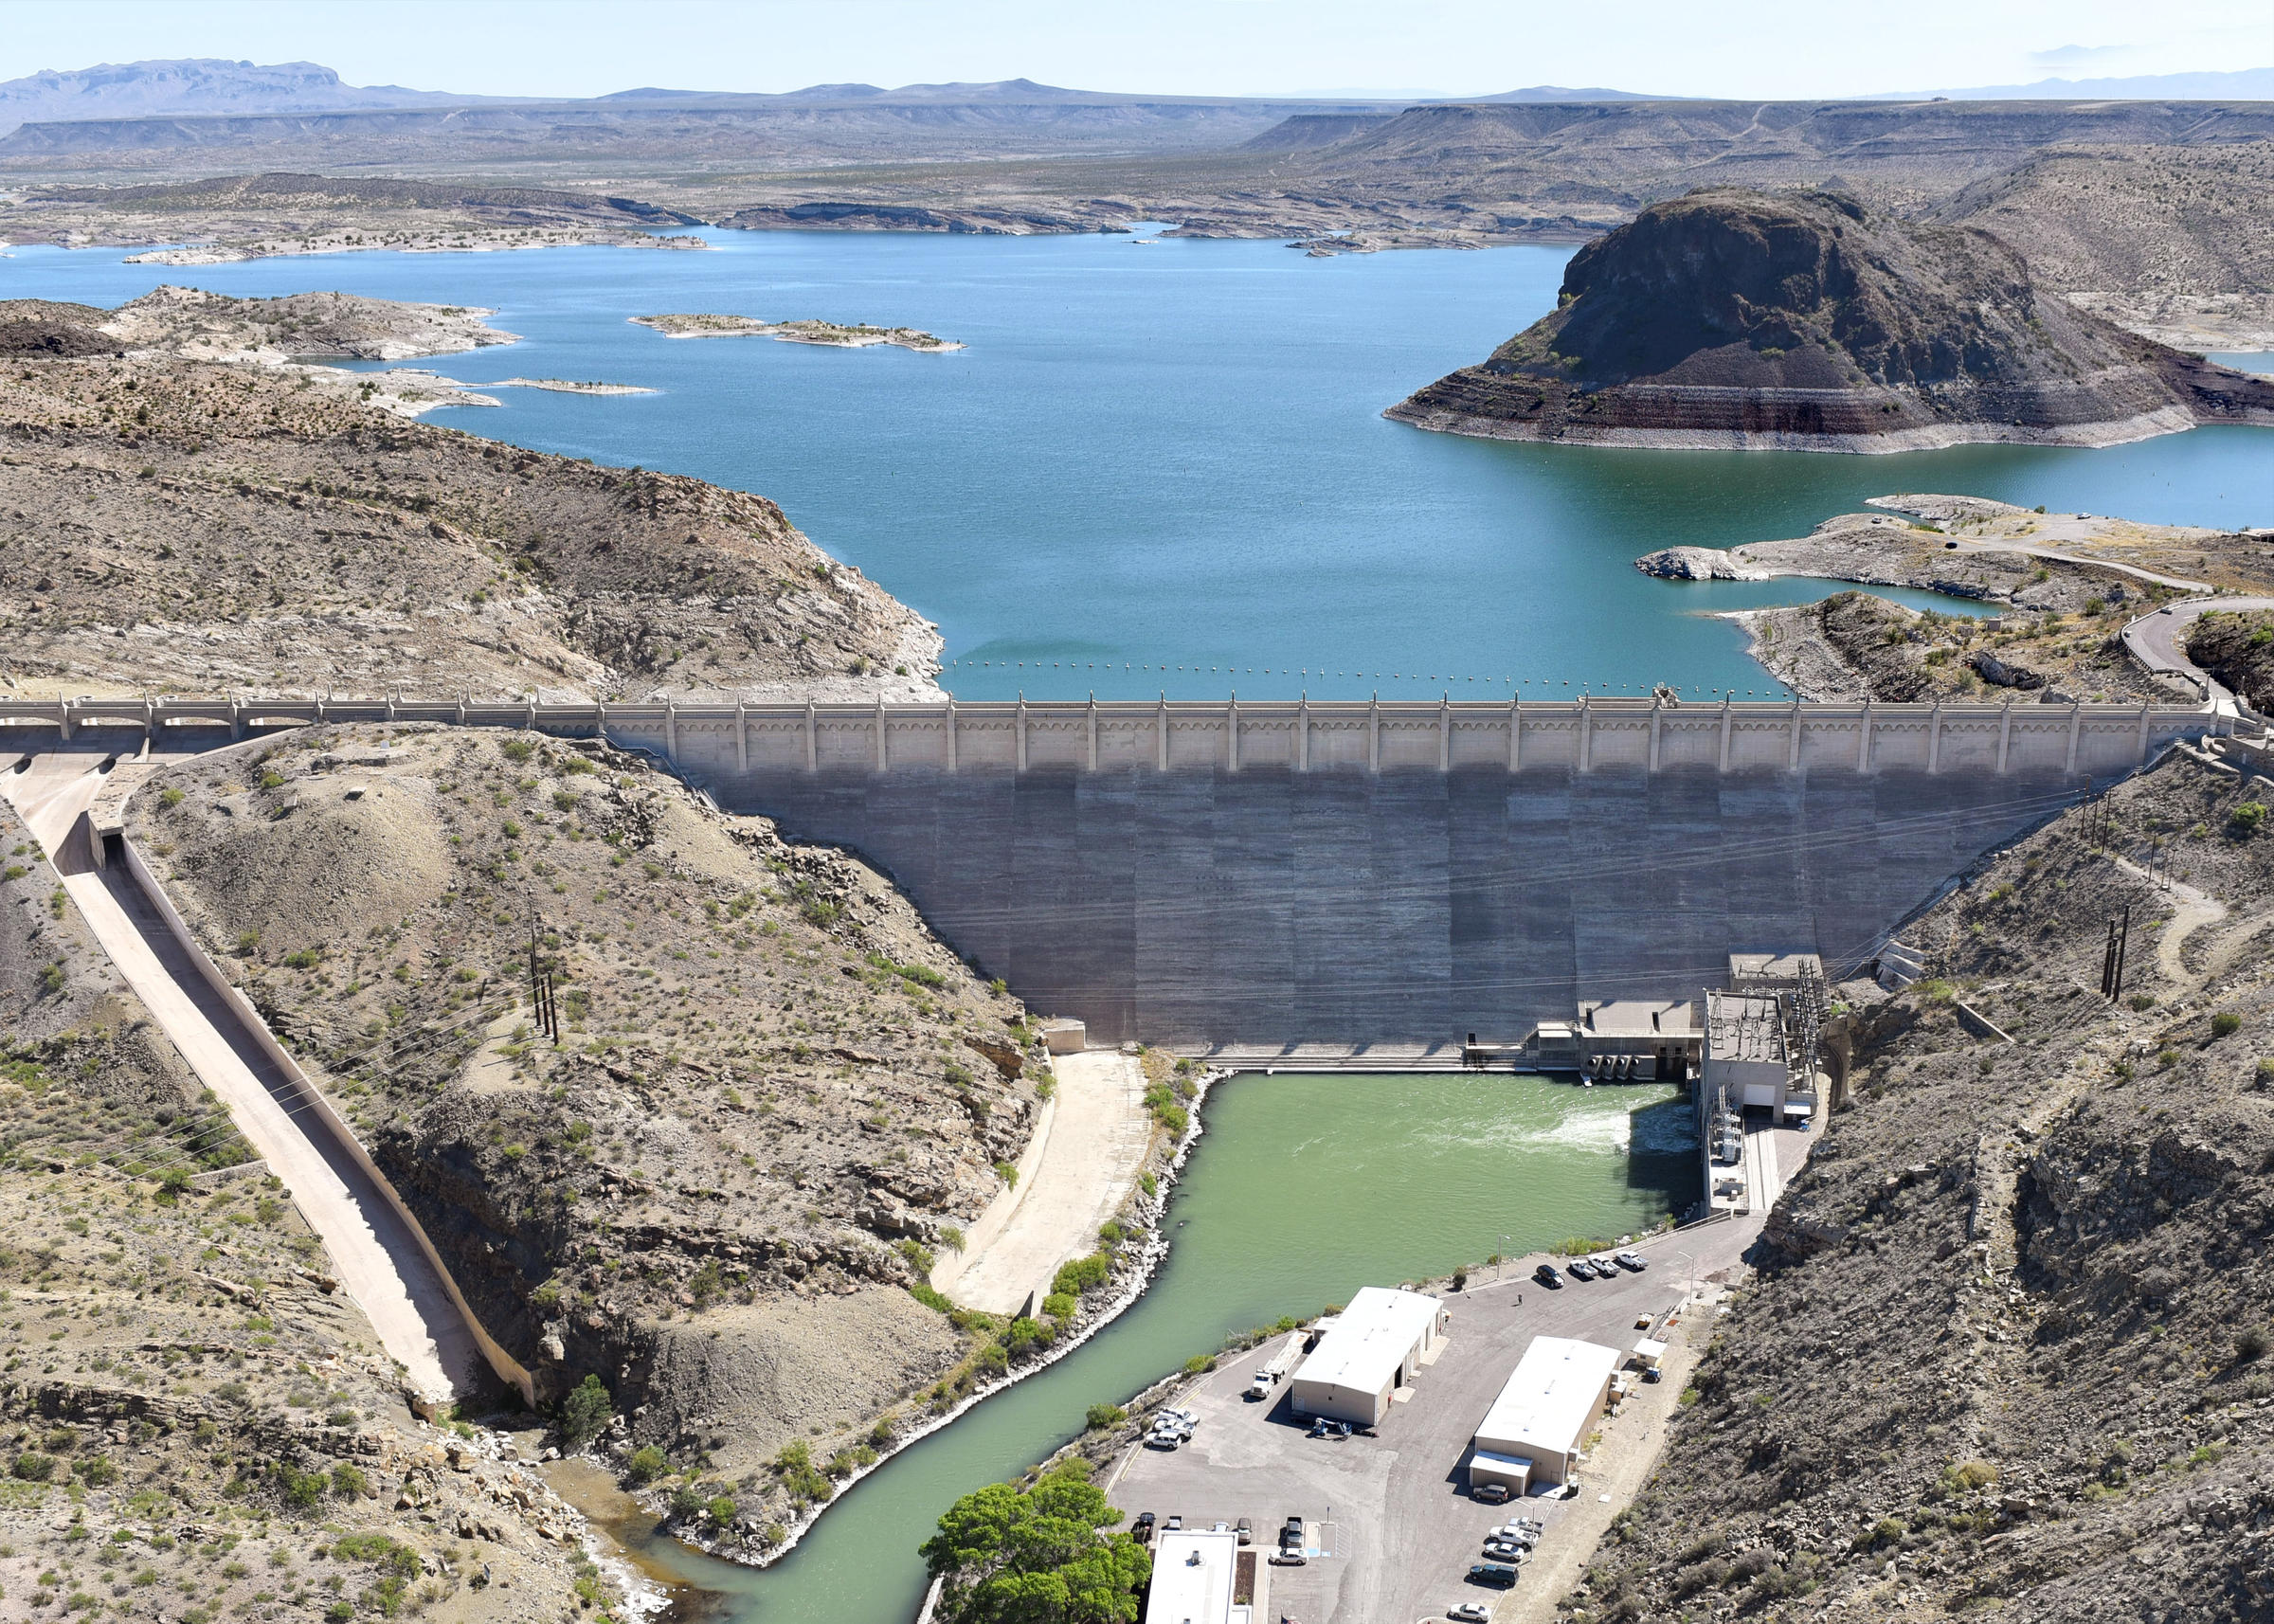 Herrell Leads Letter to Protect the Future of Elephant Butte KRWG